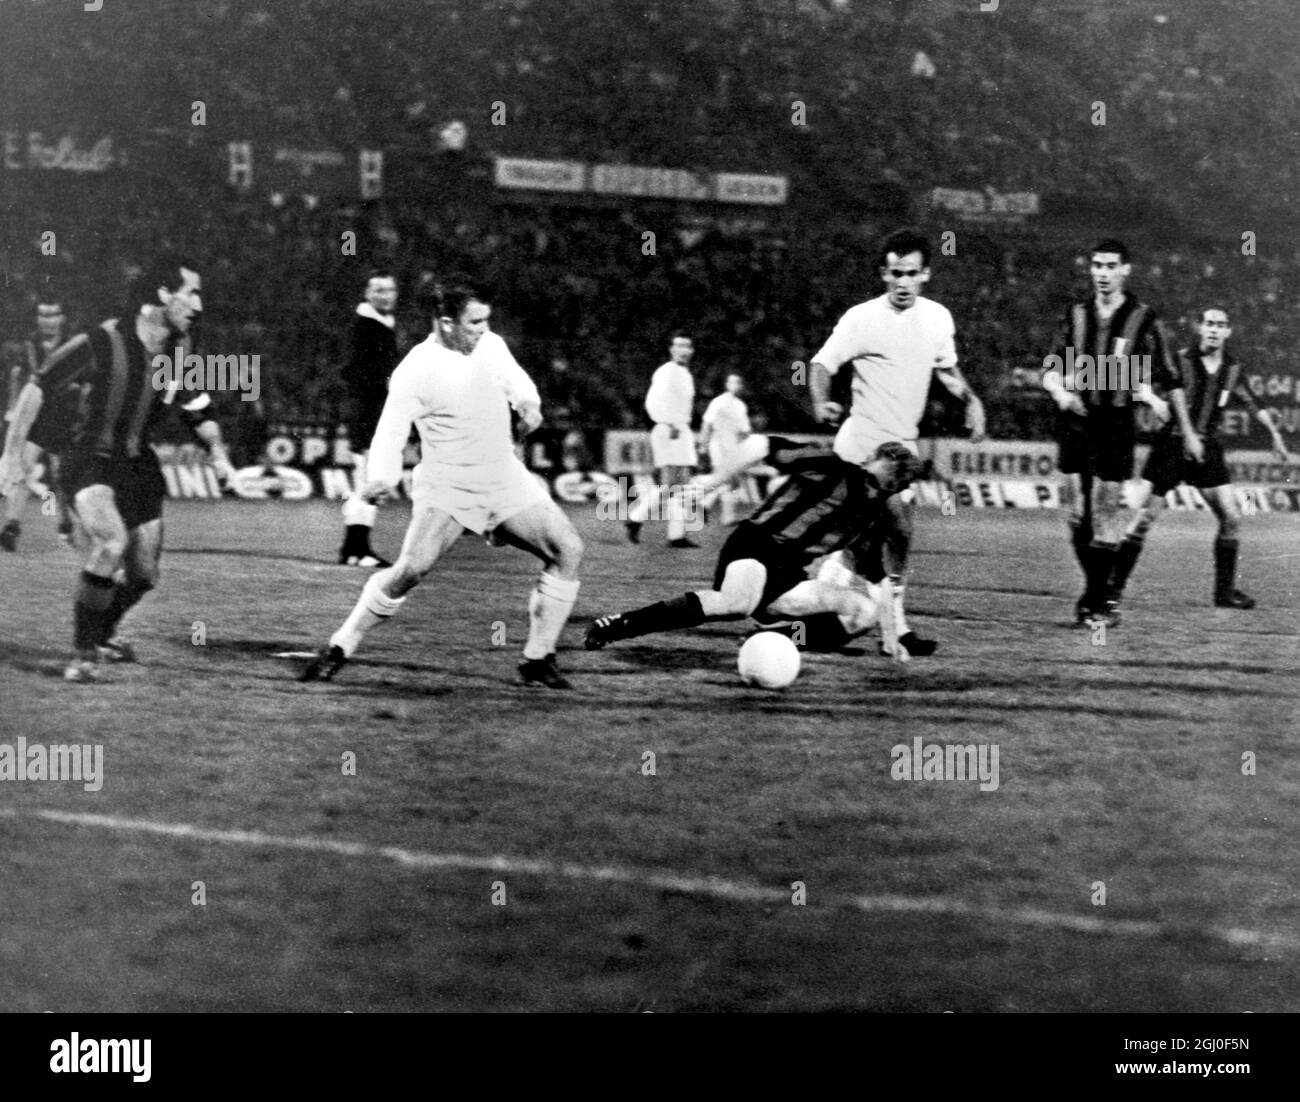 Real Madrid's Ferenc Puskas (in white, left) and Felo (white, right) in a tussle for possession with Inter Milan's Guarneri (centre) during the final of the European Cup in Vienna. Inter defeated Real Madrid by three goals to one to take the cup for the first time. 27th May 1964. Stock Photo